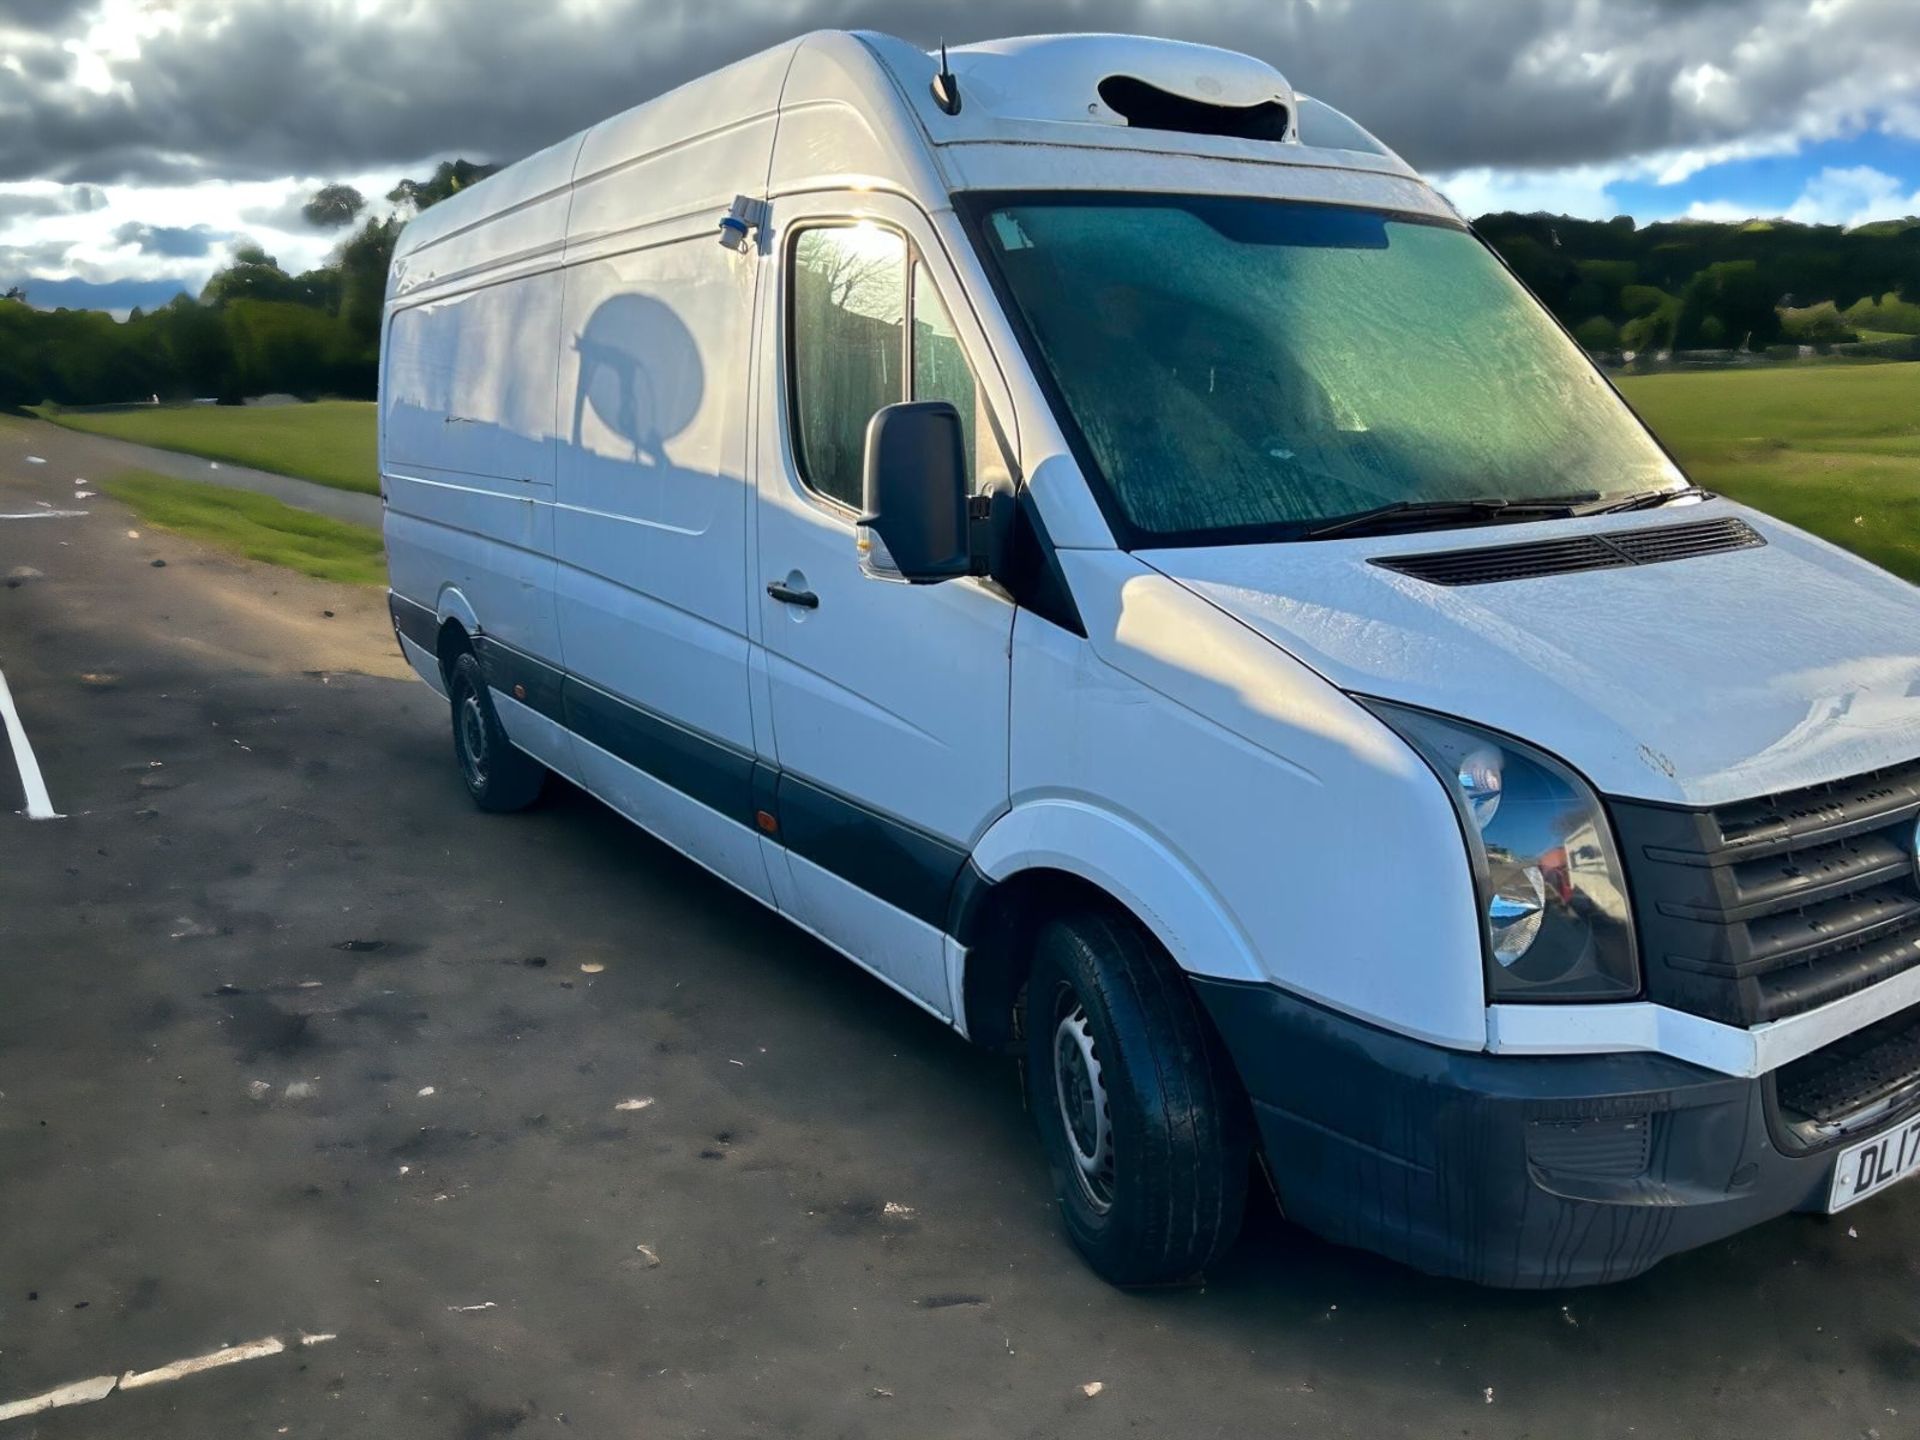 2017 VOLKSWAGEN CRAFTER CR35 TDI DIESEL VAN - NON-RUNNER, ULEZ FREE - HPI CLEAR - READY TO GO! - Image 2 of 6